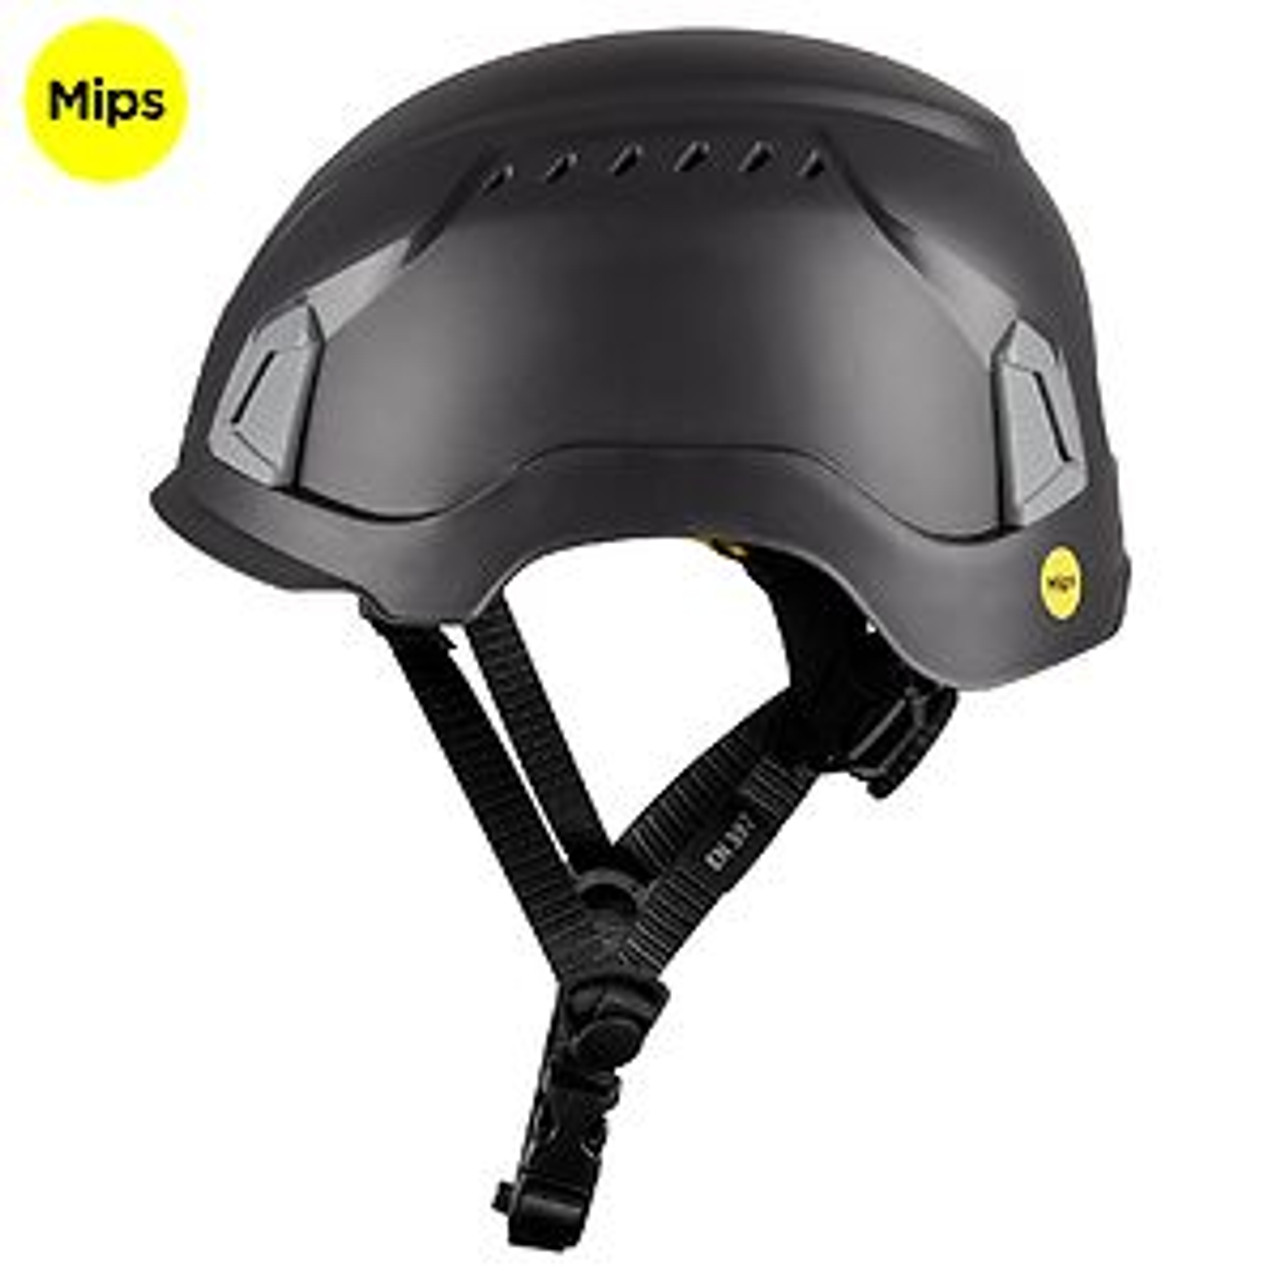 ZEKLER Helmet | ZONE Grey Technical Safety Helmet  with MIPS for Rope Access, Electricians and Construction